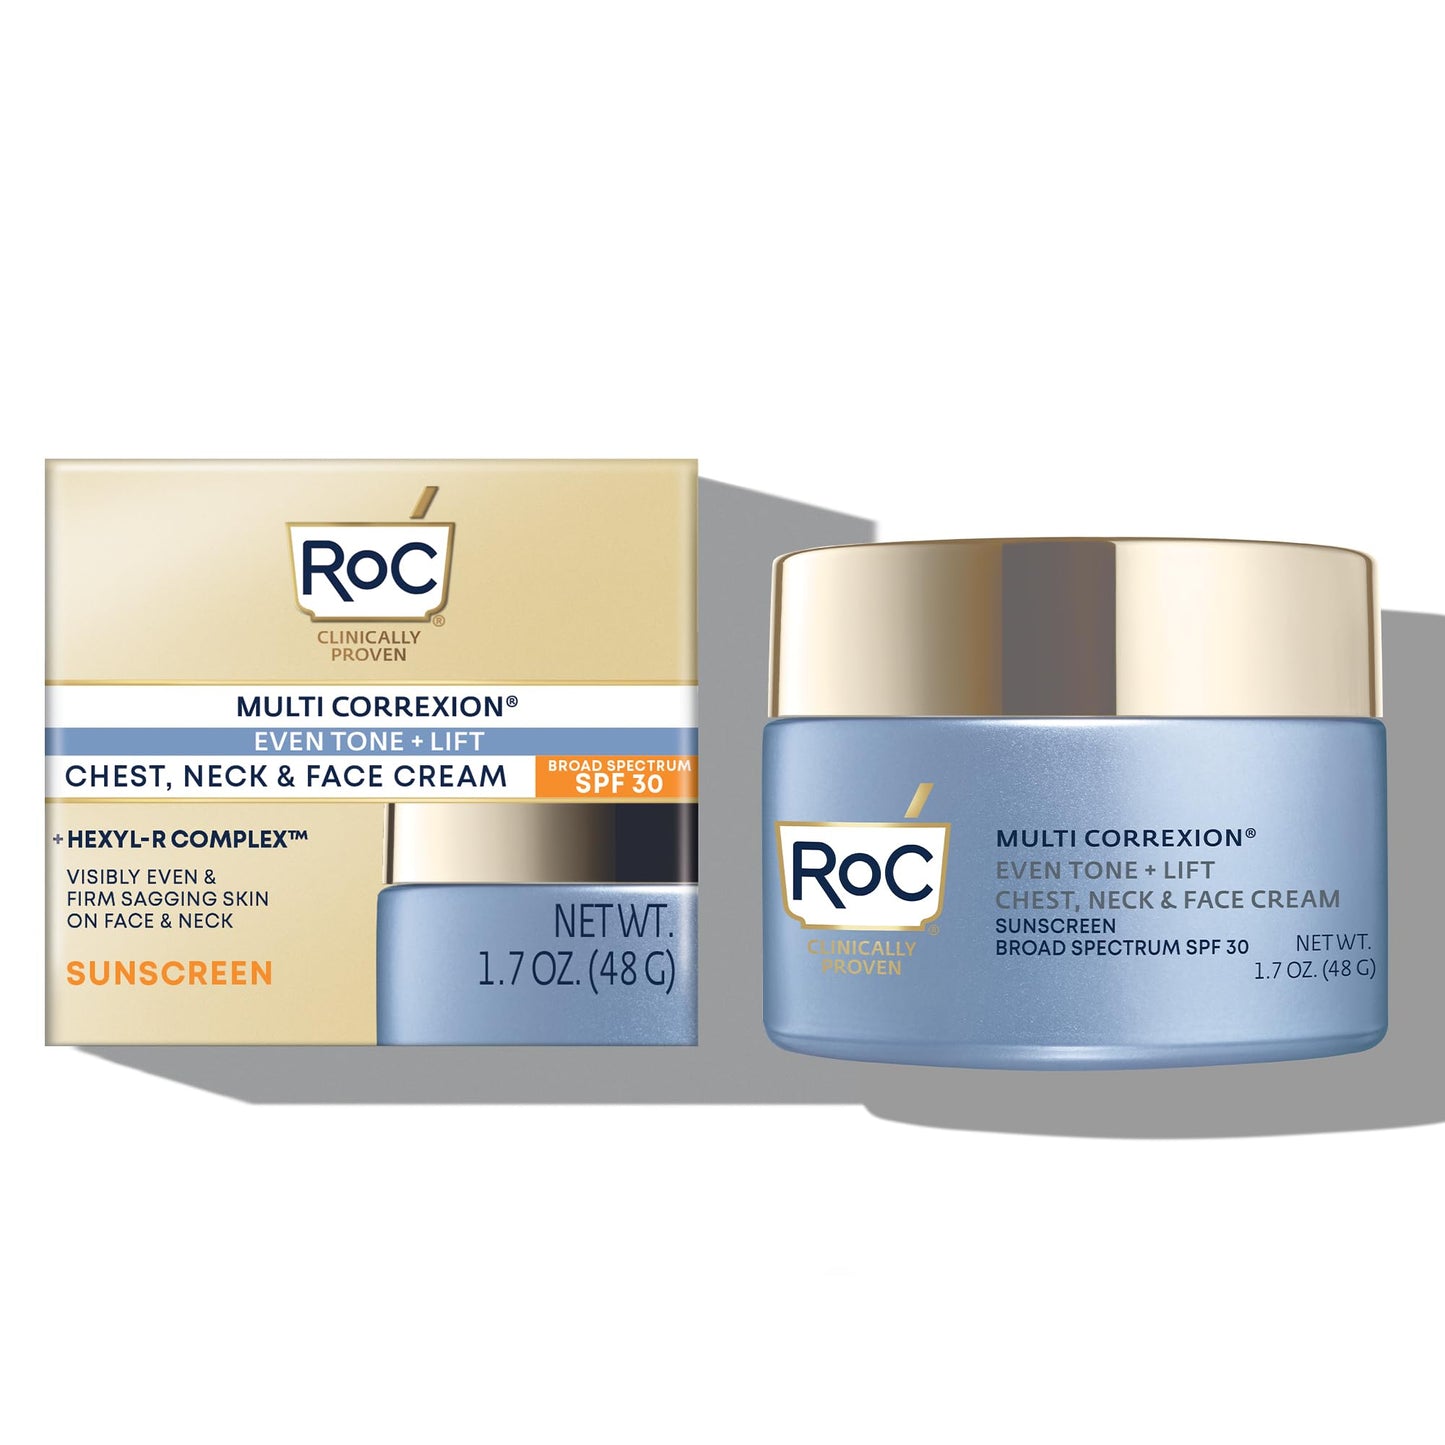 RoC Multi Correxion 5 in 1 Chest, Neck, and Face Moisturizer Cream with SPF 30, Neck & Wrinkle Firming, Vitamin E & Shea Butter, Oil Free Skin Care, Christmas Gifts & Stocking Stuffers, 1.7 Ounces